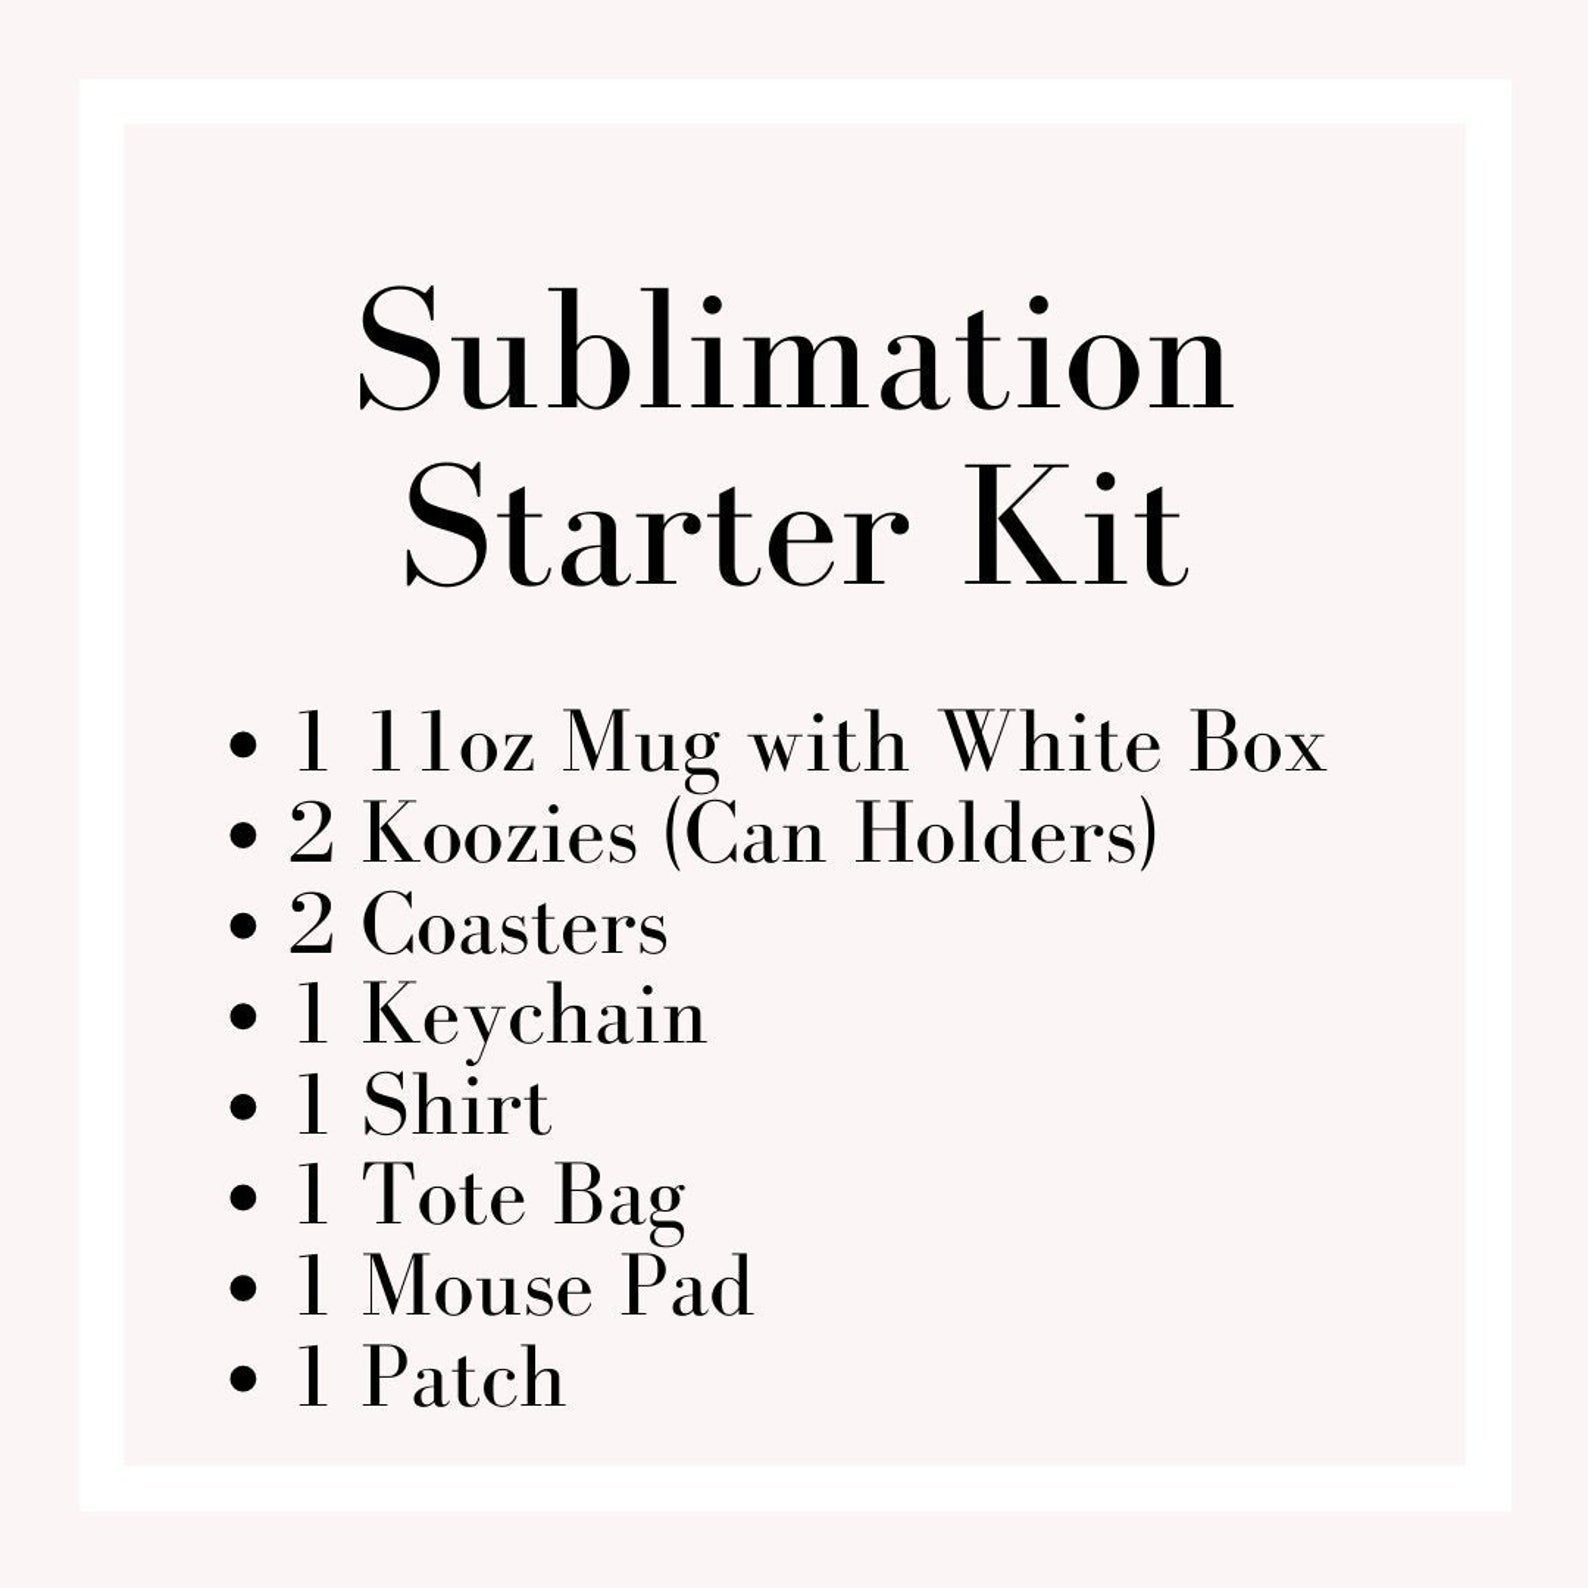 BLANK Sublimation Tote Bag,16 White,100% Polyester Tote Bag,sublimation  blanks,sublimation blank,Sublimation Bag,Sublimation Ready,Tote Bag